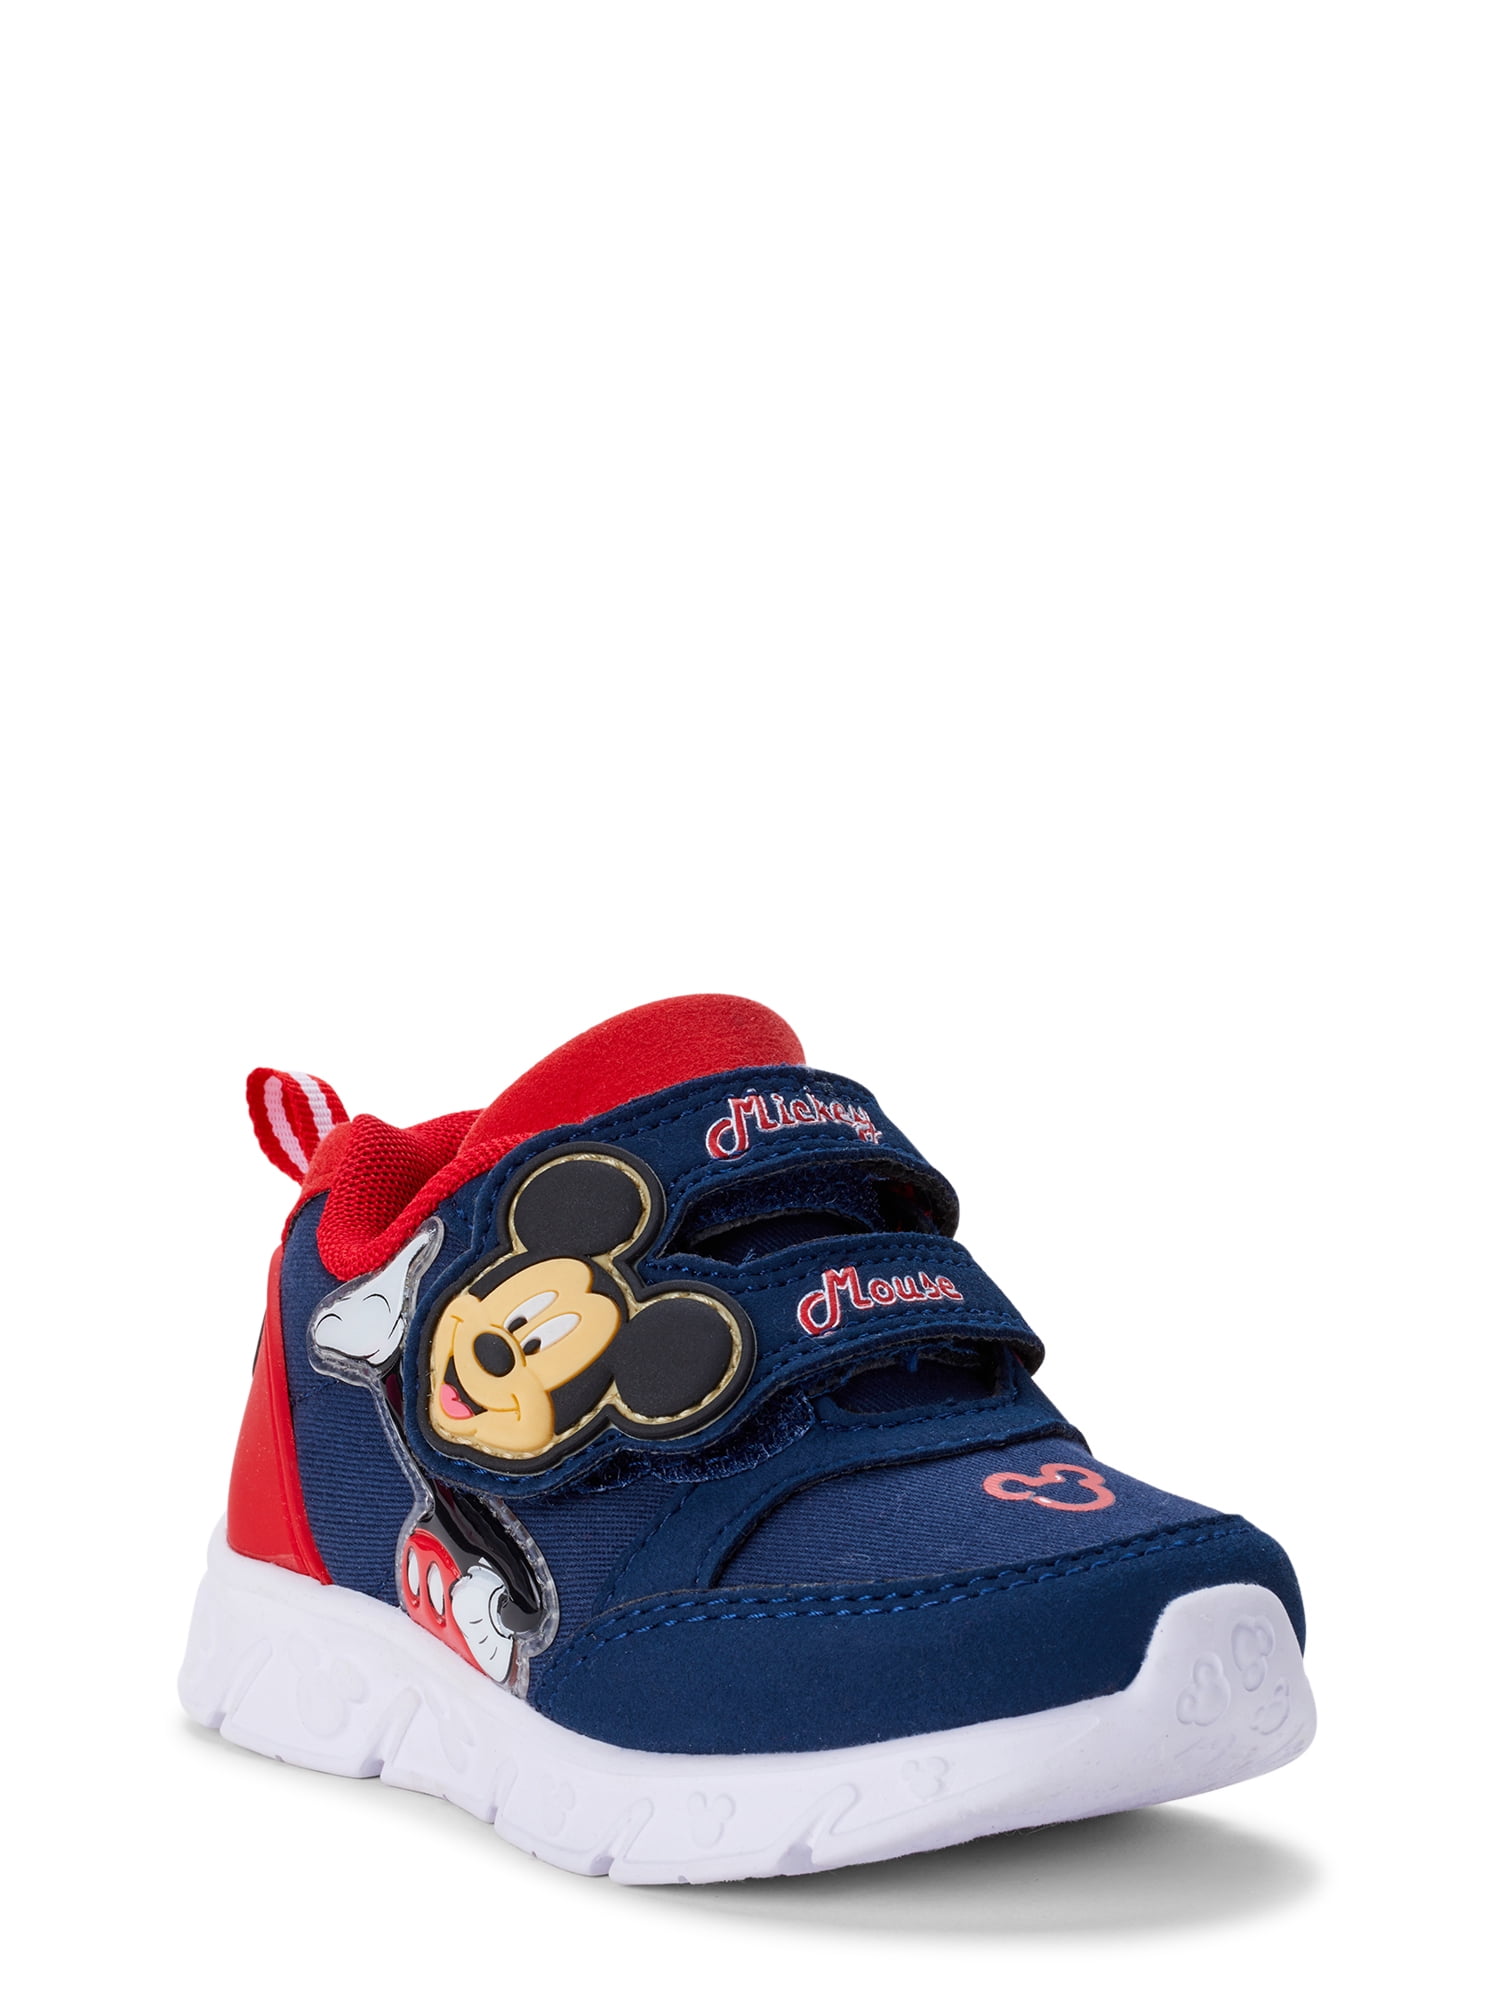 Mickey Mouse Kids \u0026 Baby Shoes 